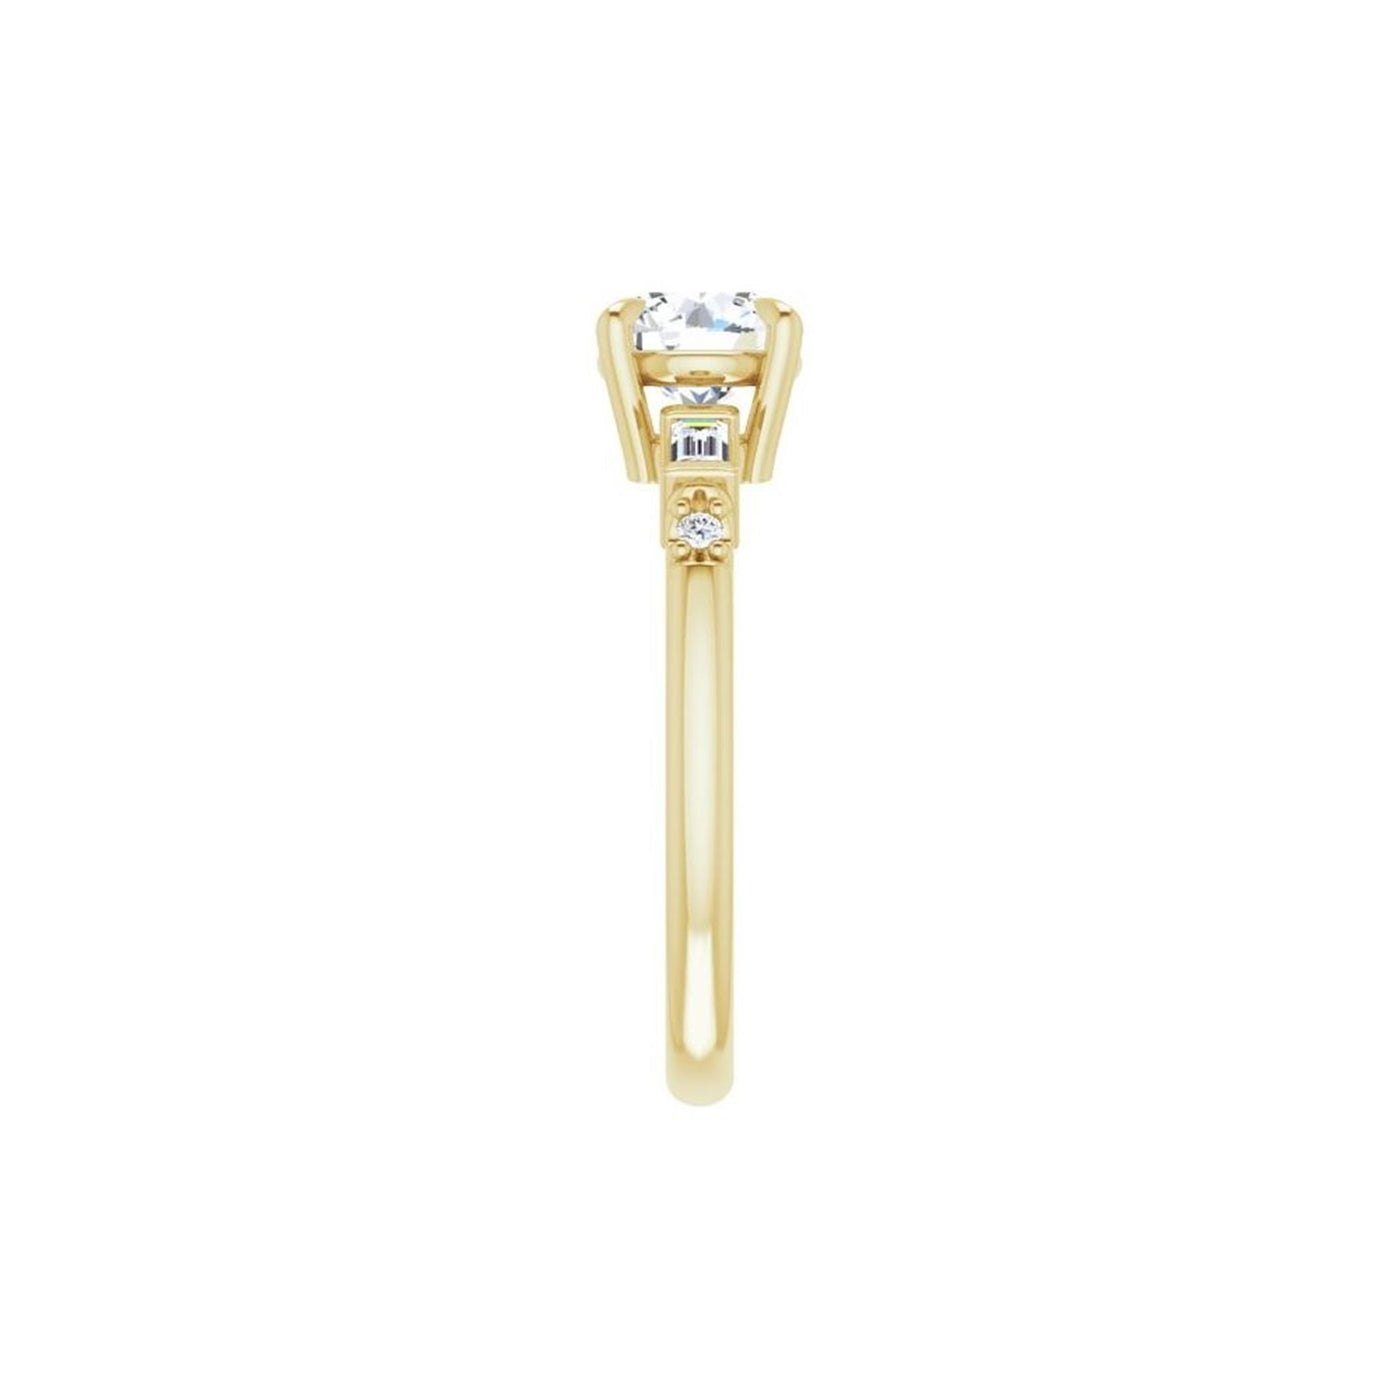 Ever & Ever 14K Yellow Gold 6.5mm center 4 Prong Style Diamond Semi-Mount Engagement Ring